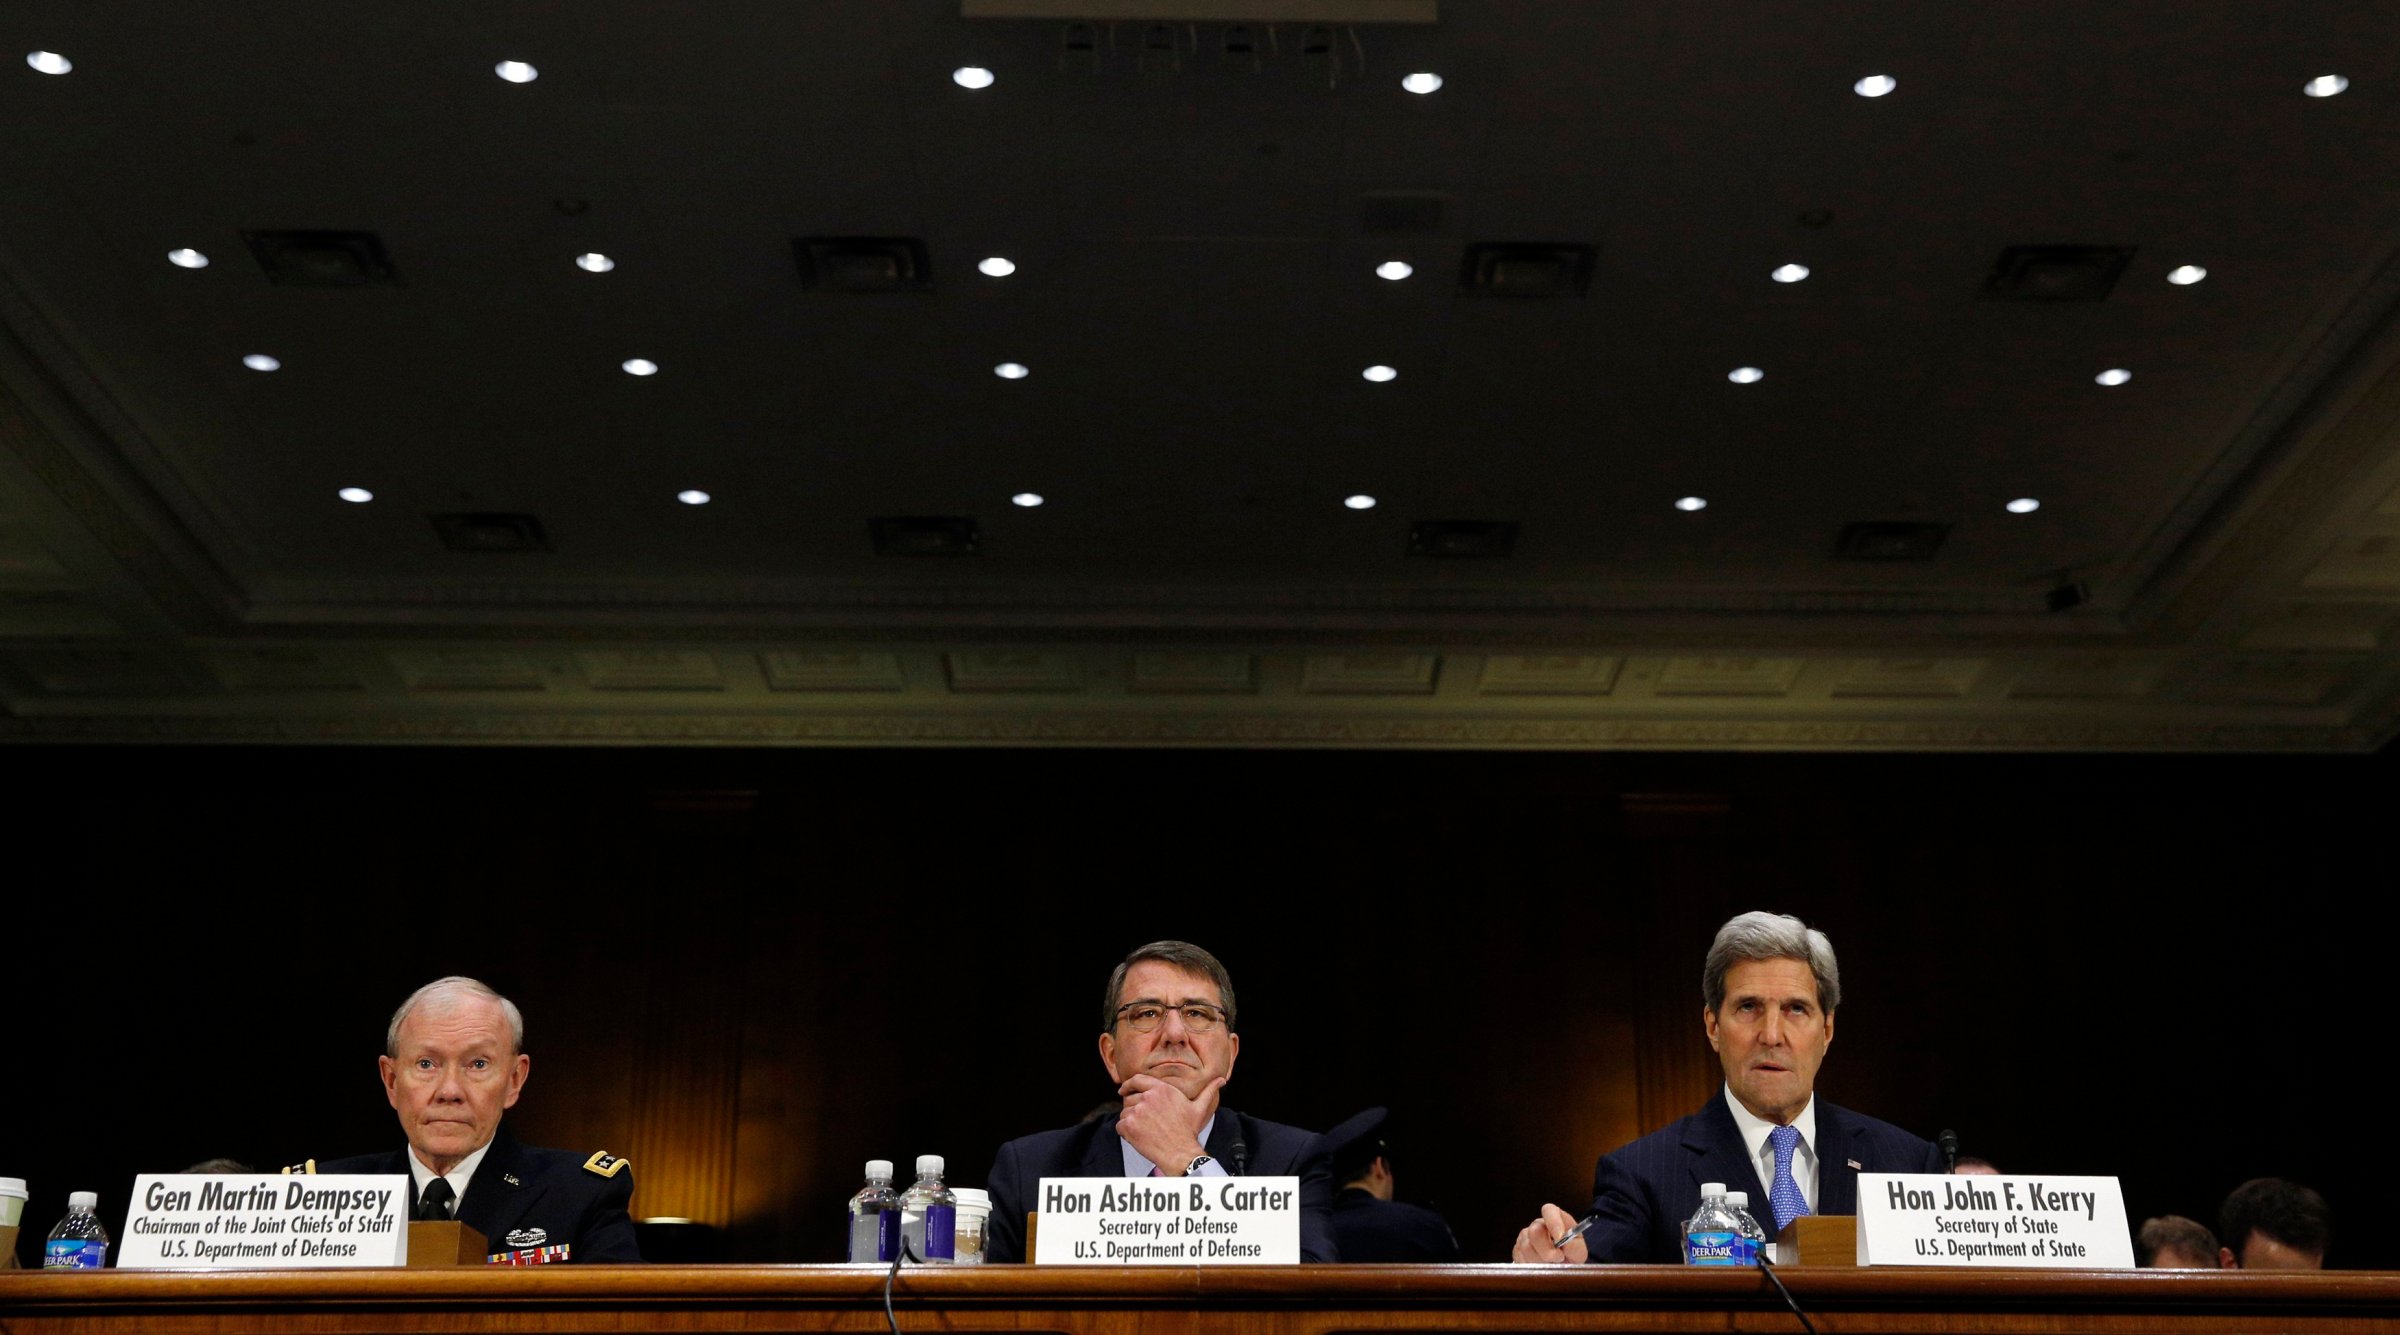 Joint Chiefs of Staff Chairman Army Gen. Martin Dempsey (L), U.S. Defense Secretary Ash Carter (C) and Secretary of State John Kerry testify at a Senate Foreign Relations Committee hearing on "The President's Request for Authorization to Use Force Against ISIS: Military and Diplomatic Efforts" on Capitol Hill in Washington on March 11, 2015.